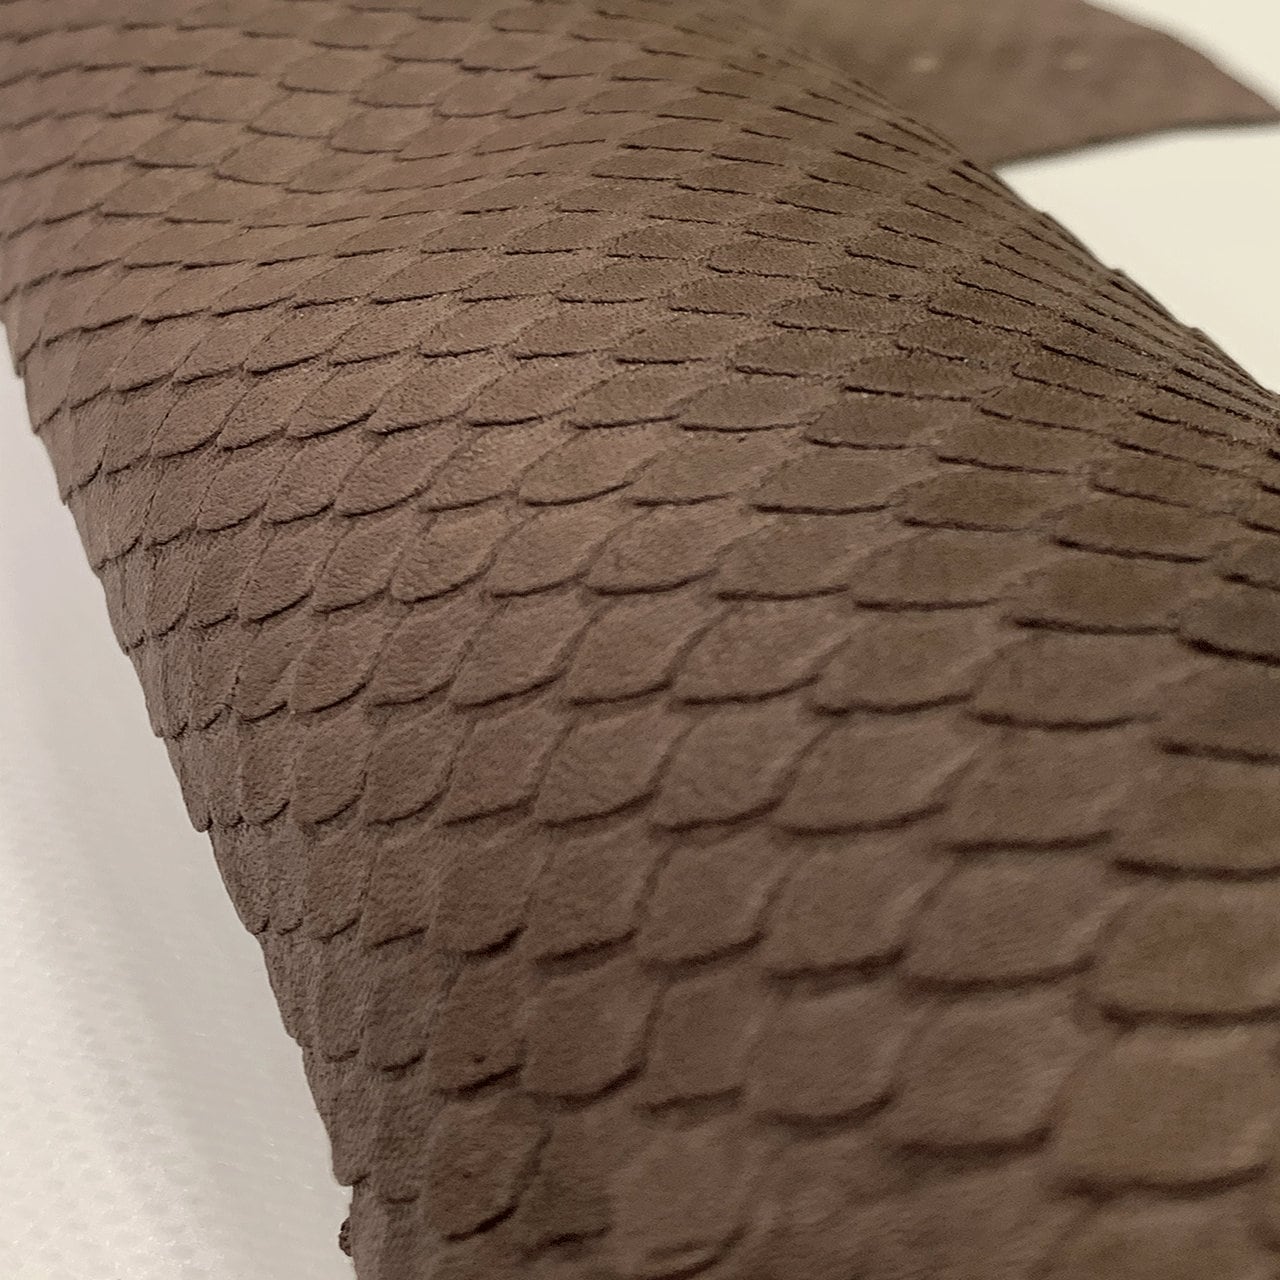 Brown fish leather for crafts in medium temper, exotic fish skin